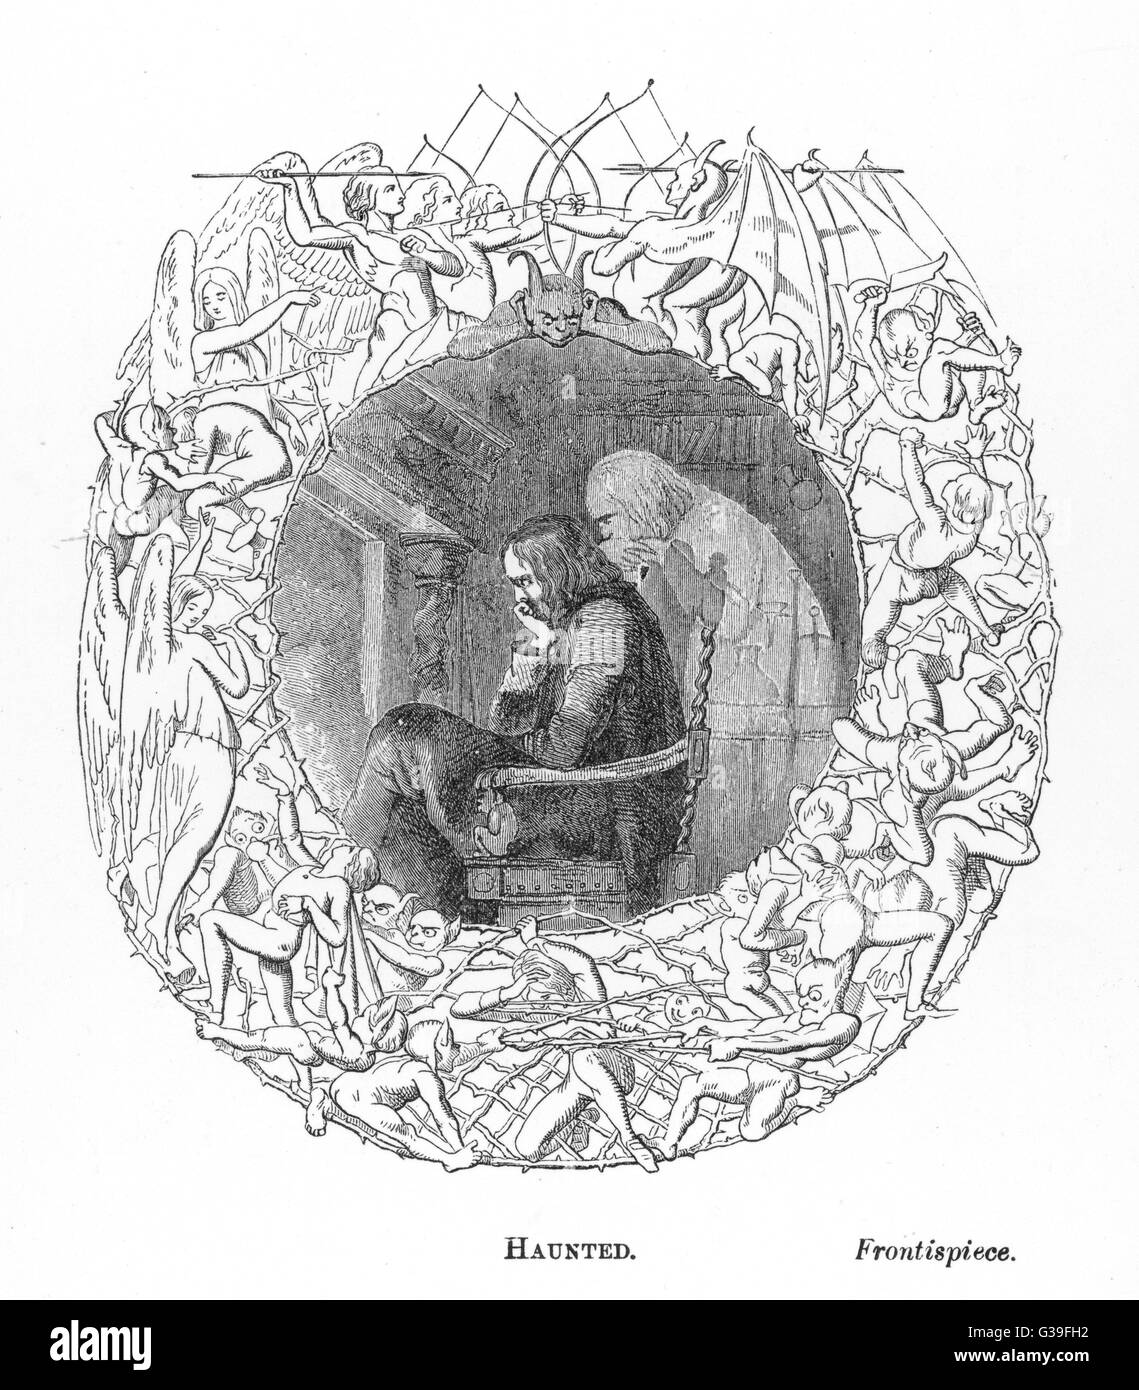 The Haunted Man: the unhappy 'haunted man' of the title gazes into the fire, while his own ghost lurks behind him.      Date: First published: 1848 Stock Photo